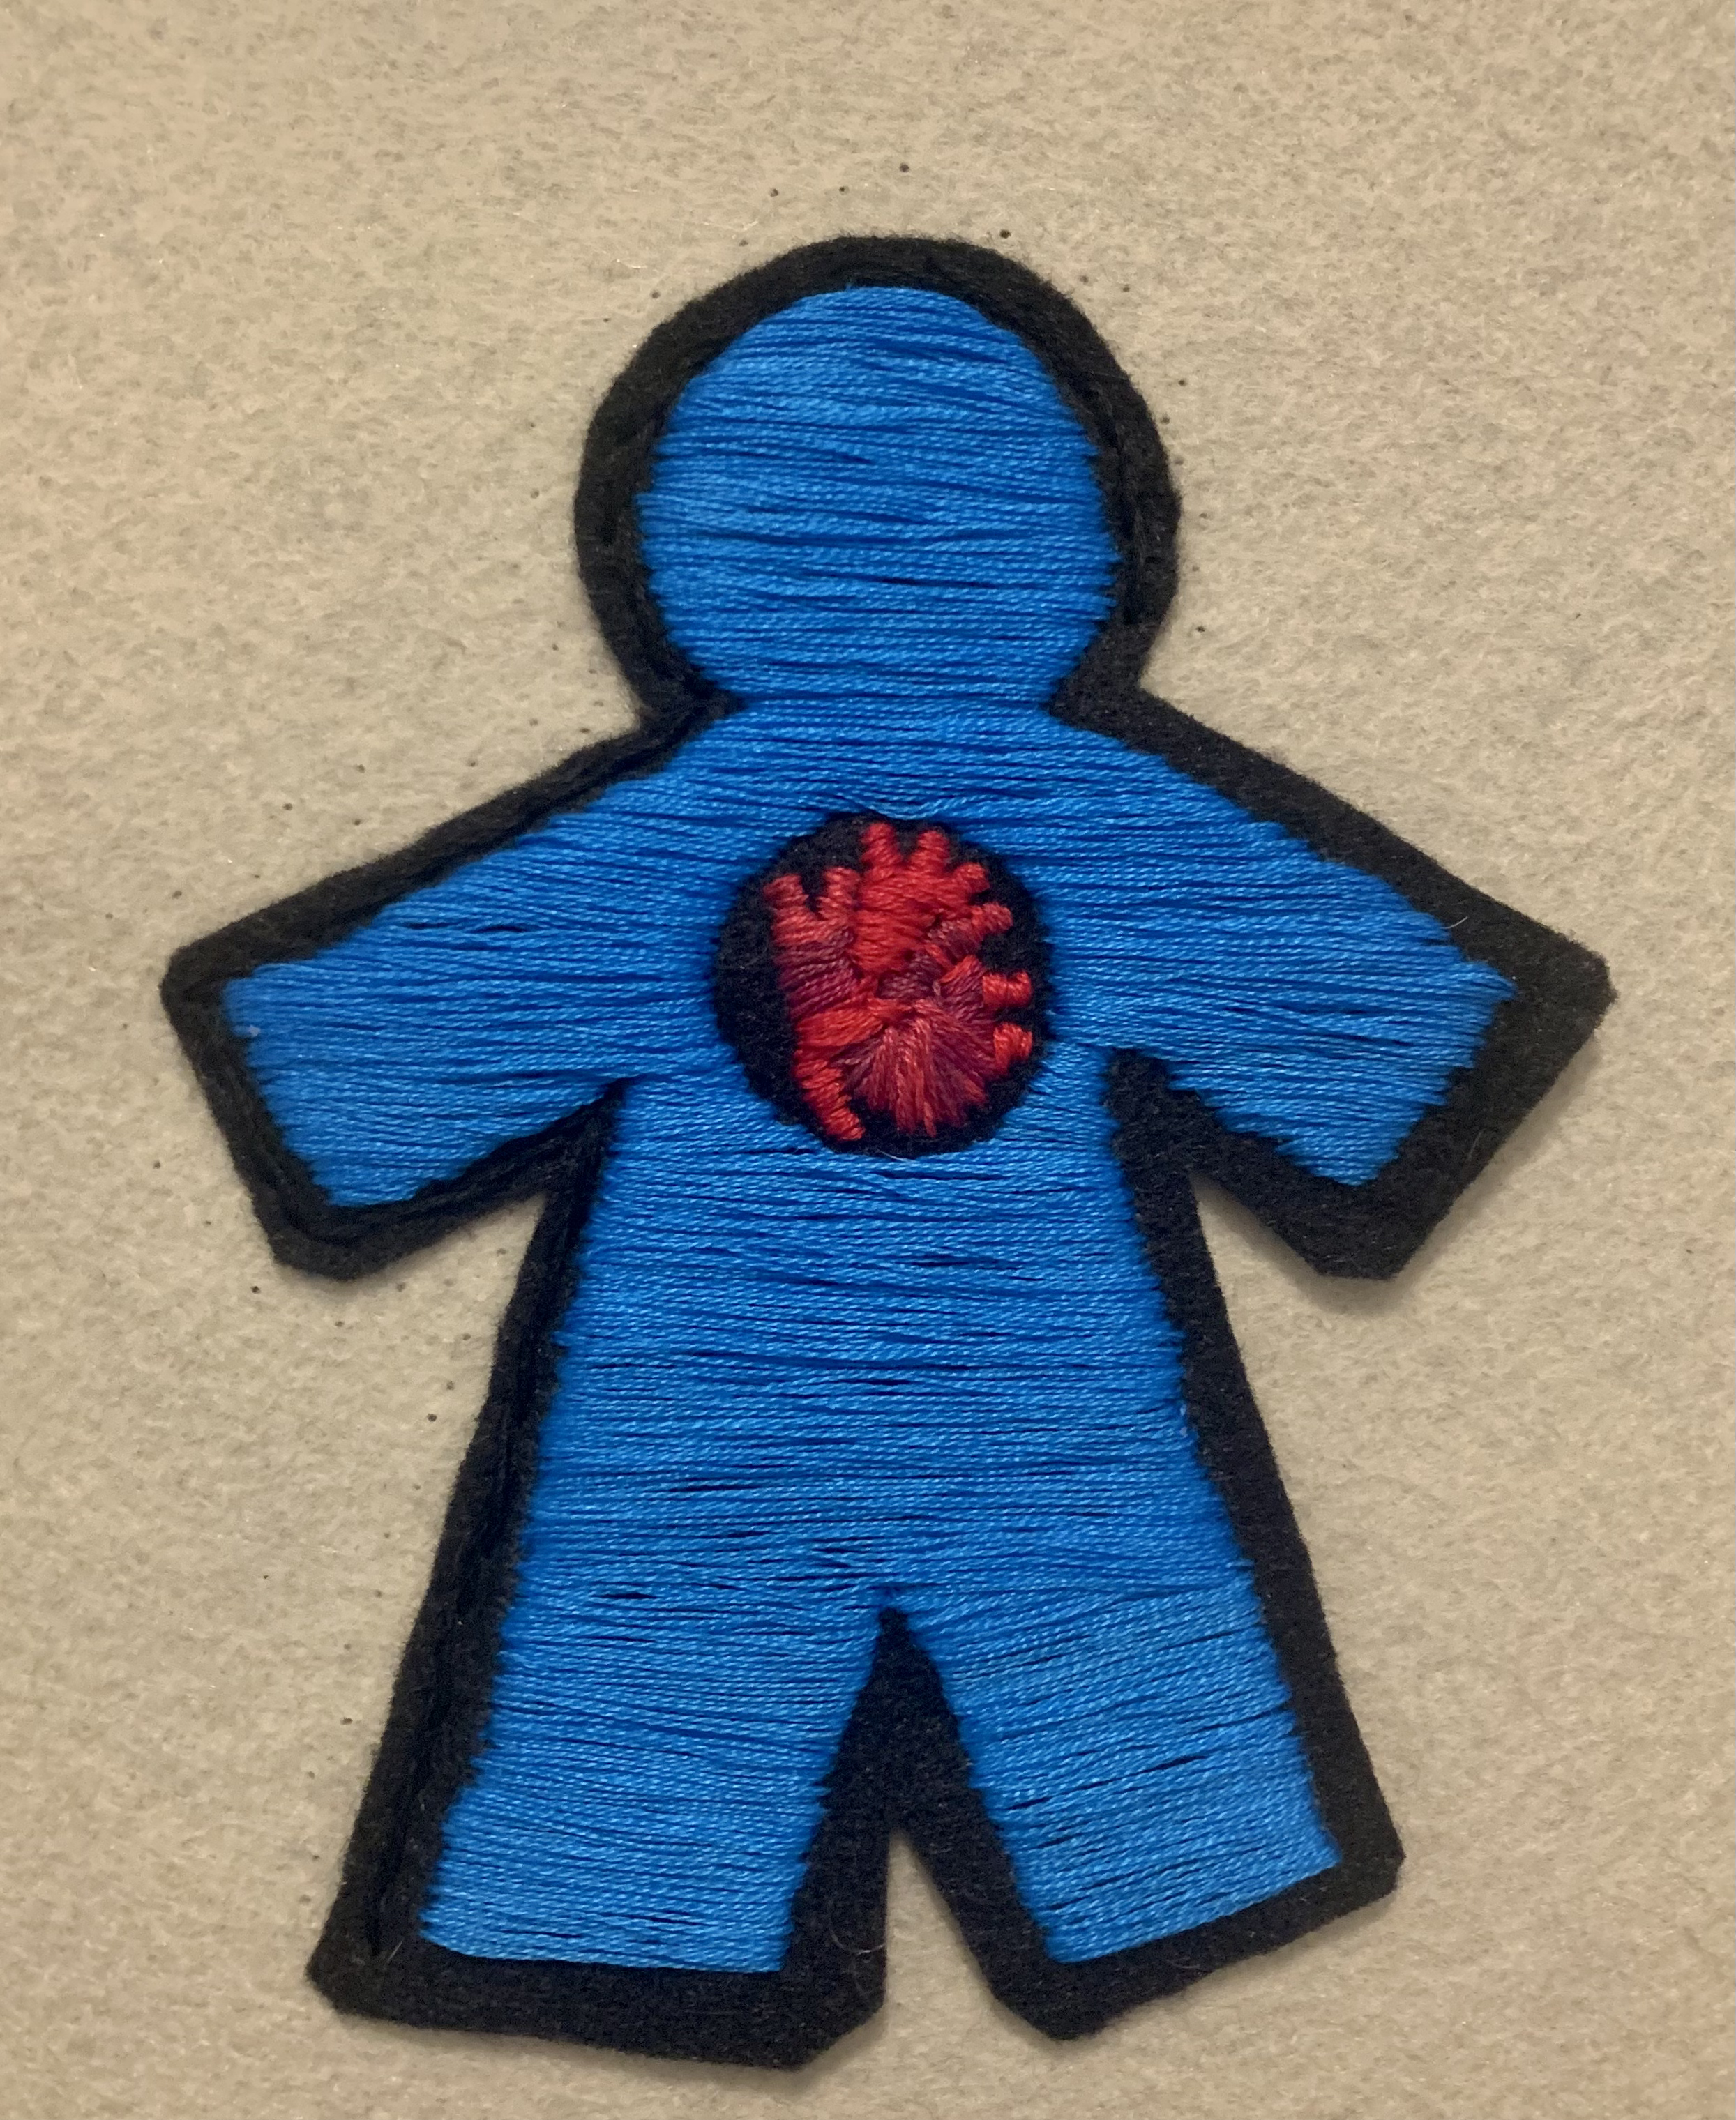 hand stitched felt patch, meant to look like a paper doll with a large hole in its chest. Inside the hole is a human heart. The doll’s body is blue and the heart isa mix of red, magenta, and pink. 